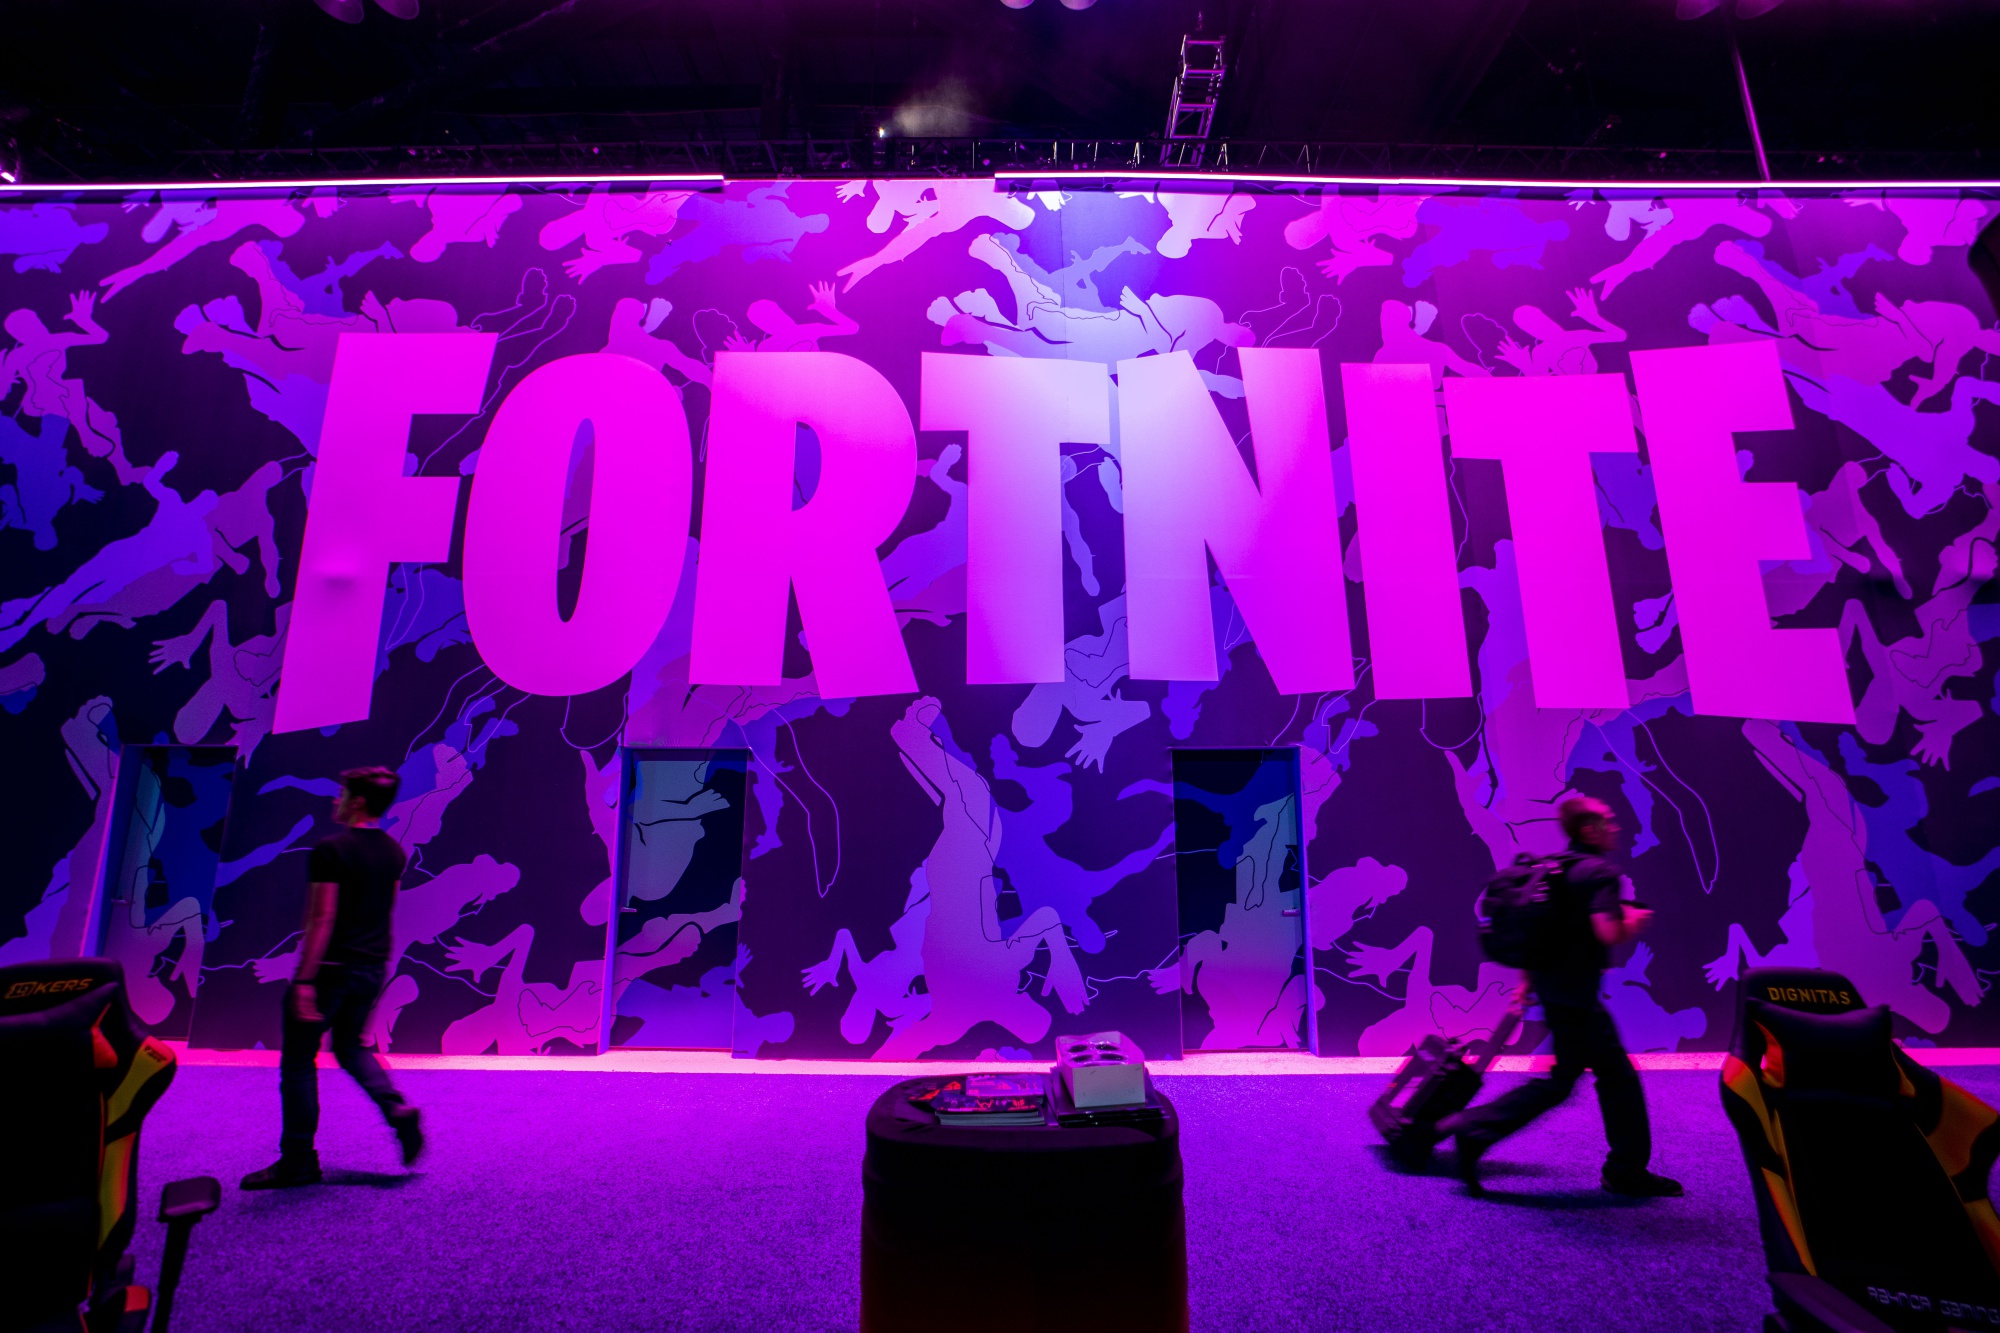 Fortnite open-world survival game mentioned in Epic Games job